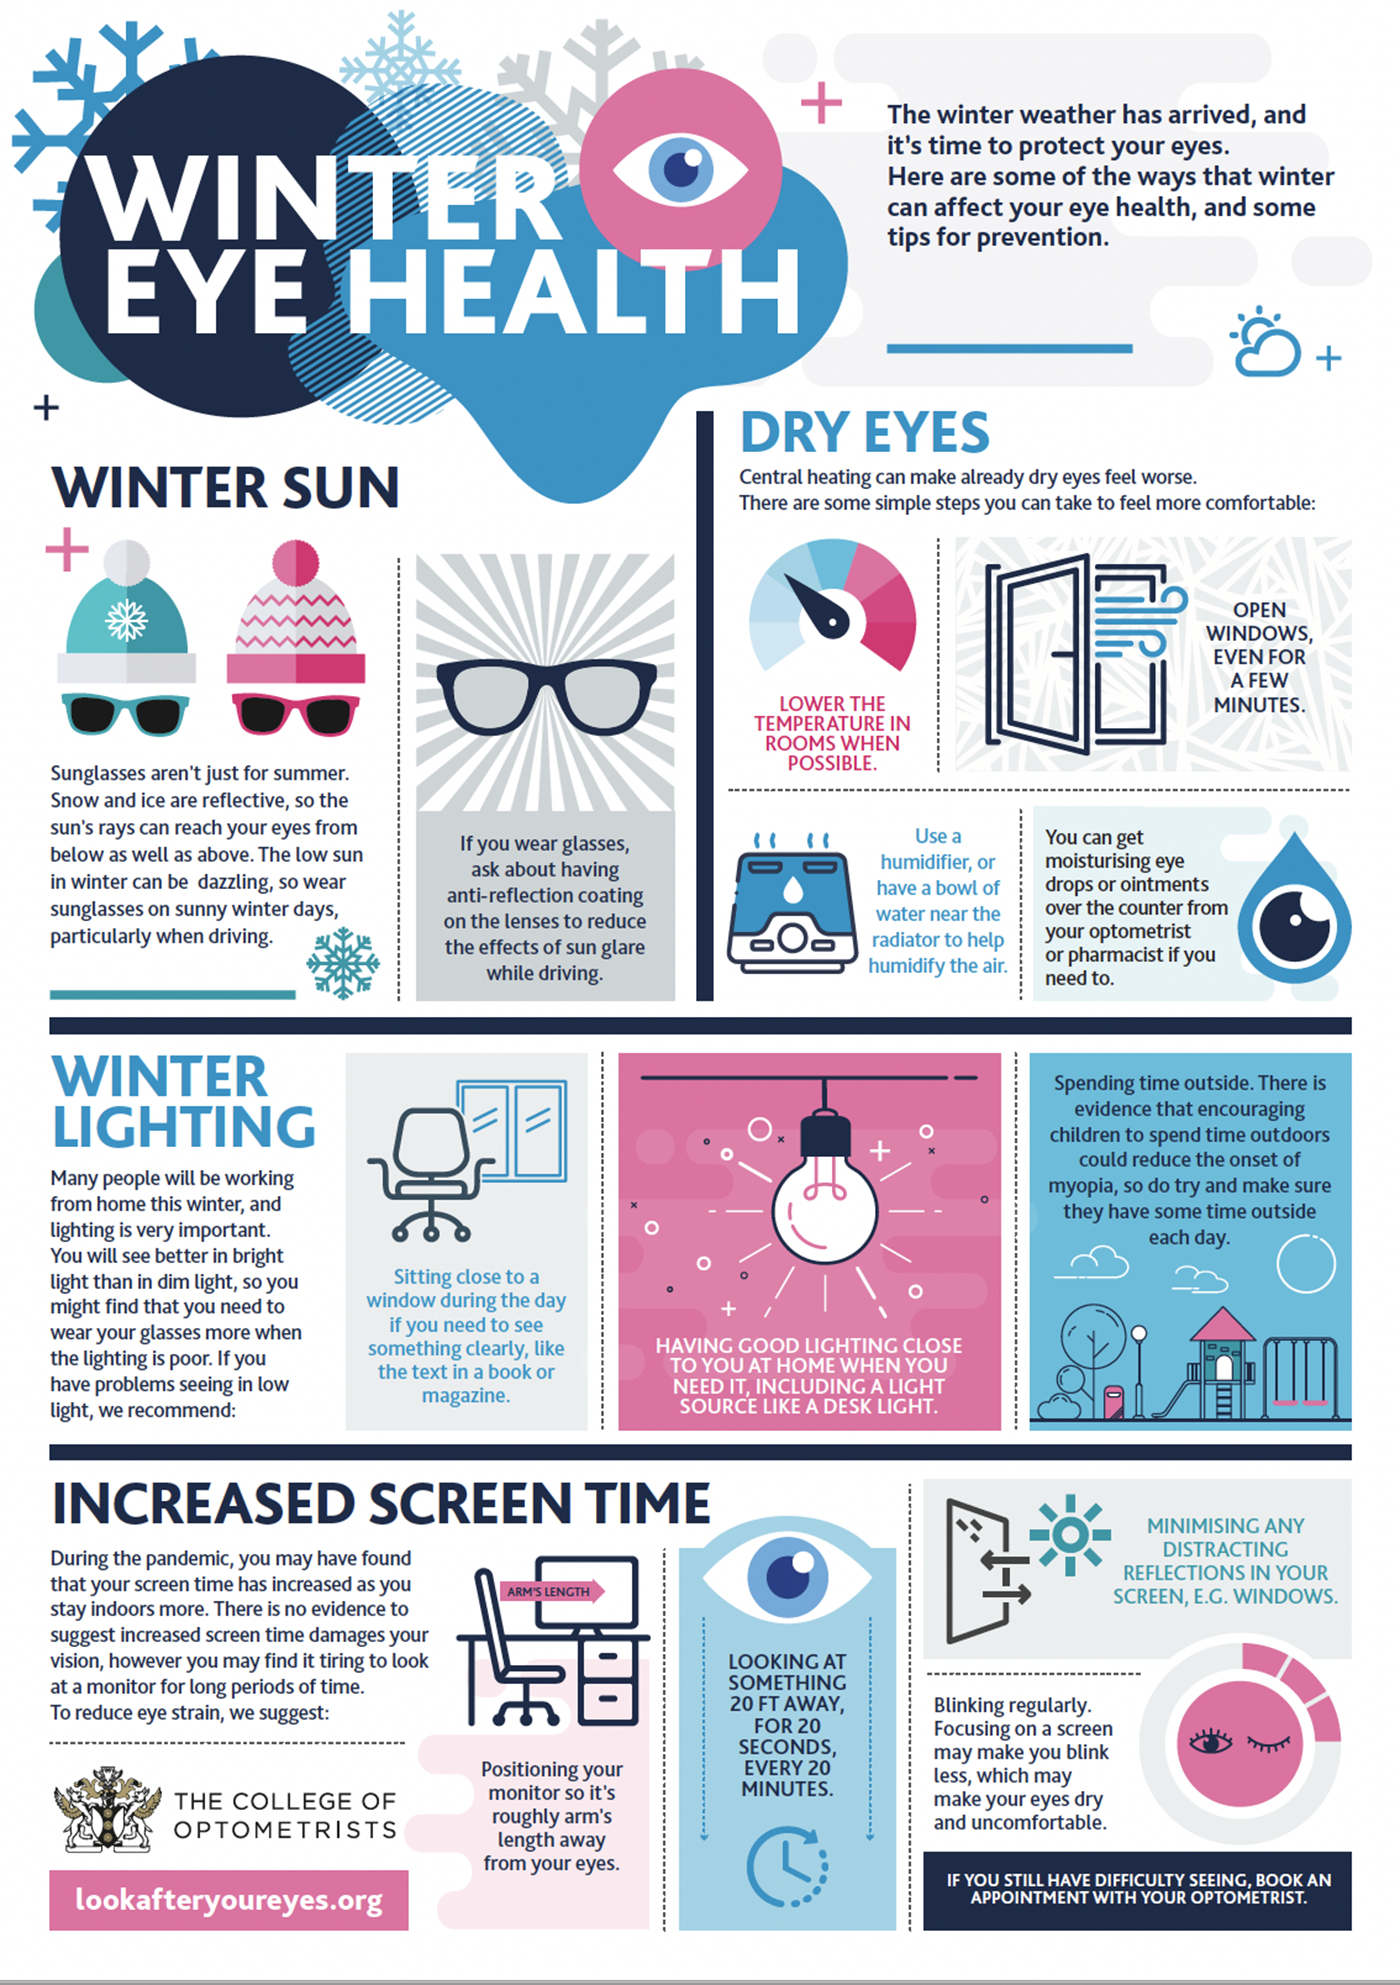 /COO/media/Media/Images/PR/Winter Eye Health 2021/COO_WEH_poster_image.png